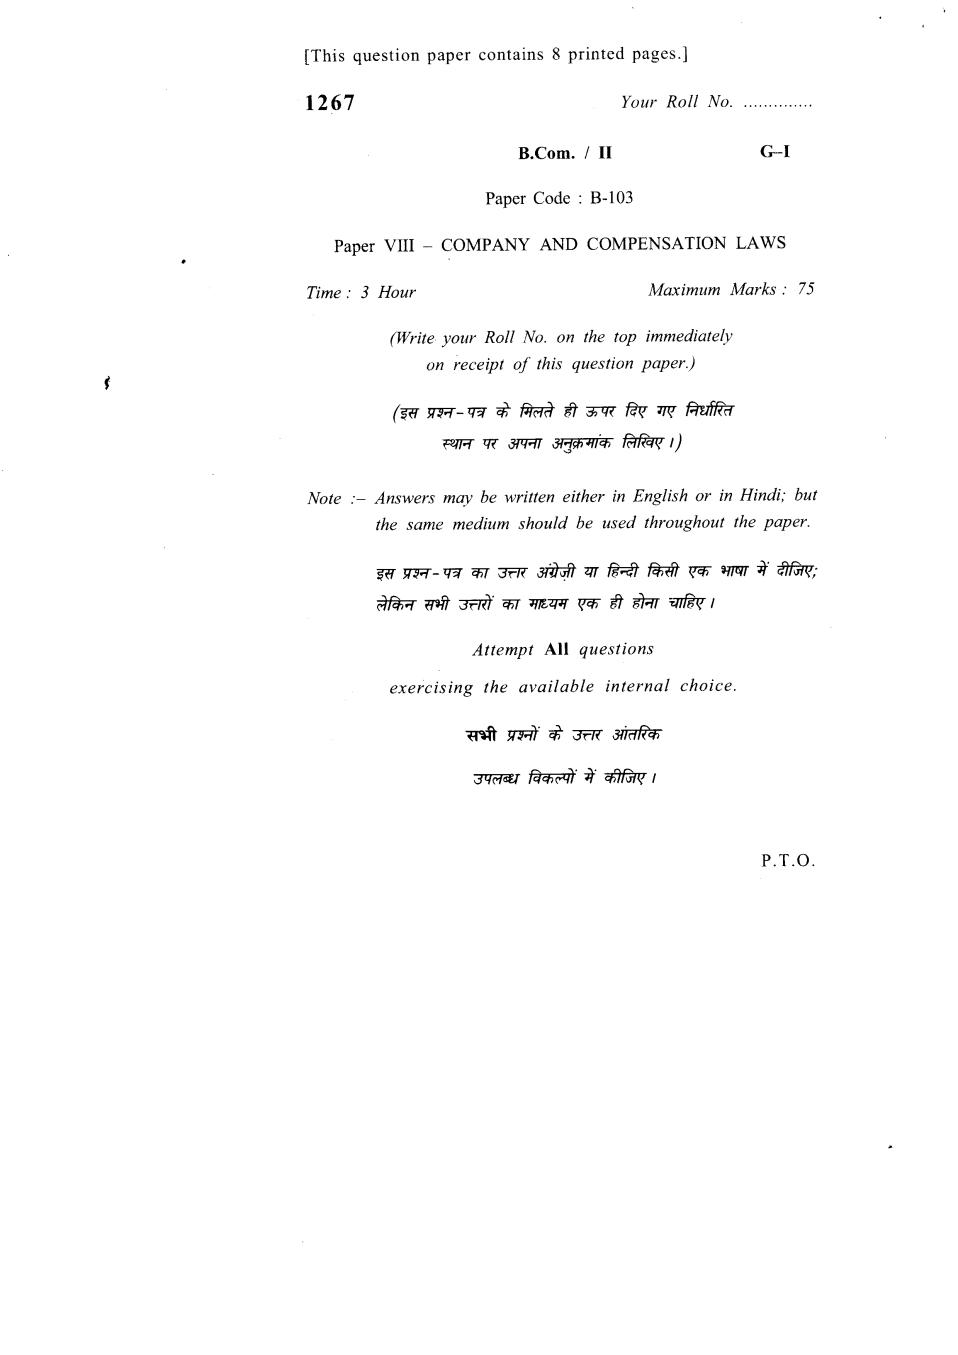 DU SOL B.Com Question Paper 2nd Year 2018 Company and Compensation Laws - Page 1